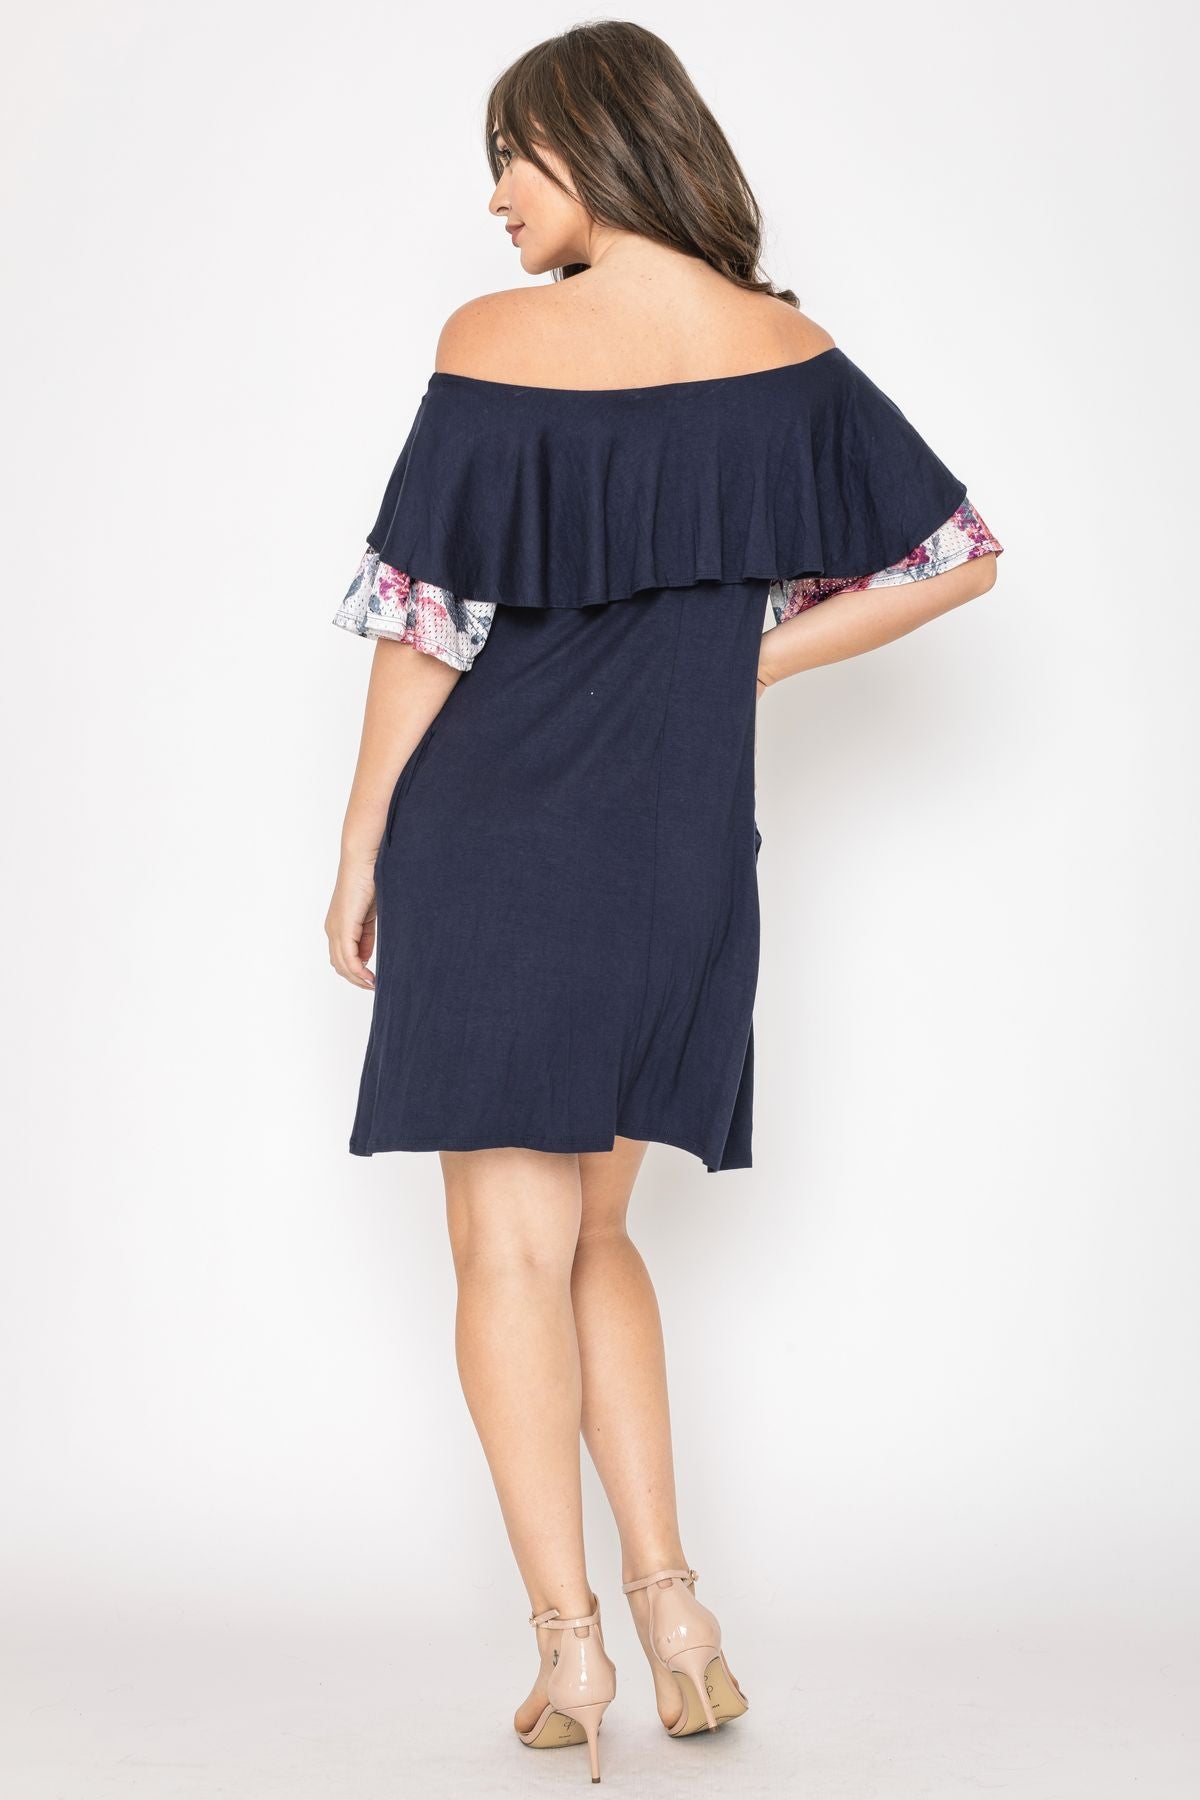 Navy & Floral Lace Ruffle Off Shoulder Dress